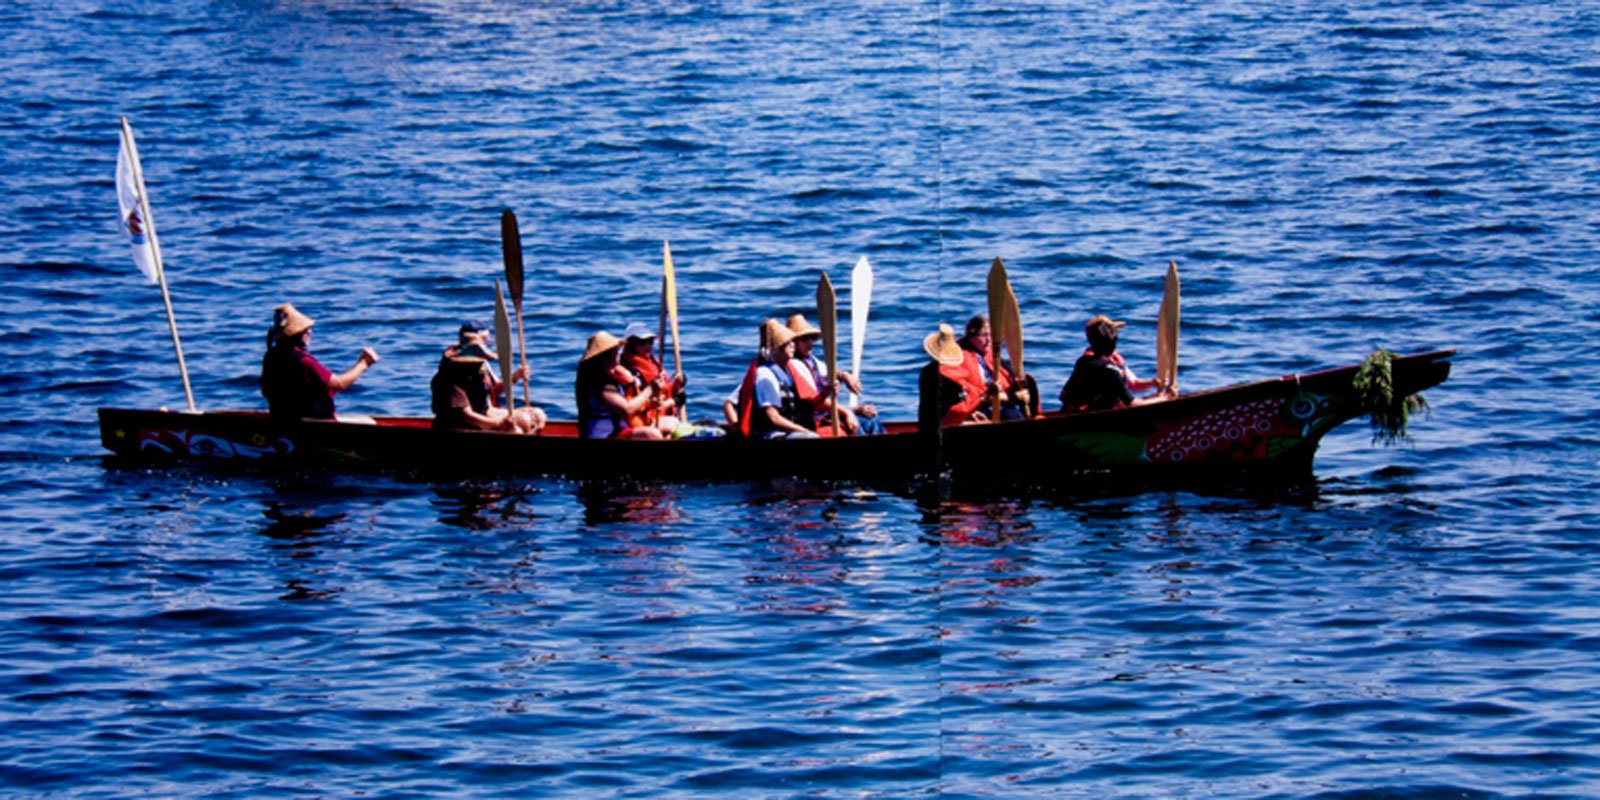 A group of people in a canoe on the water